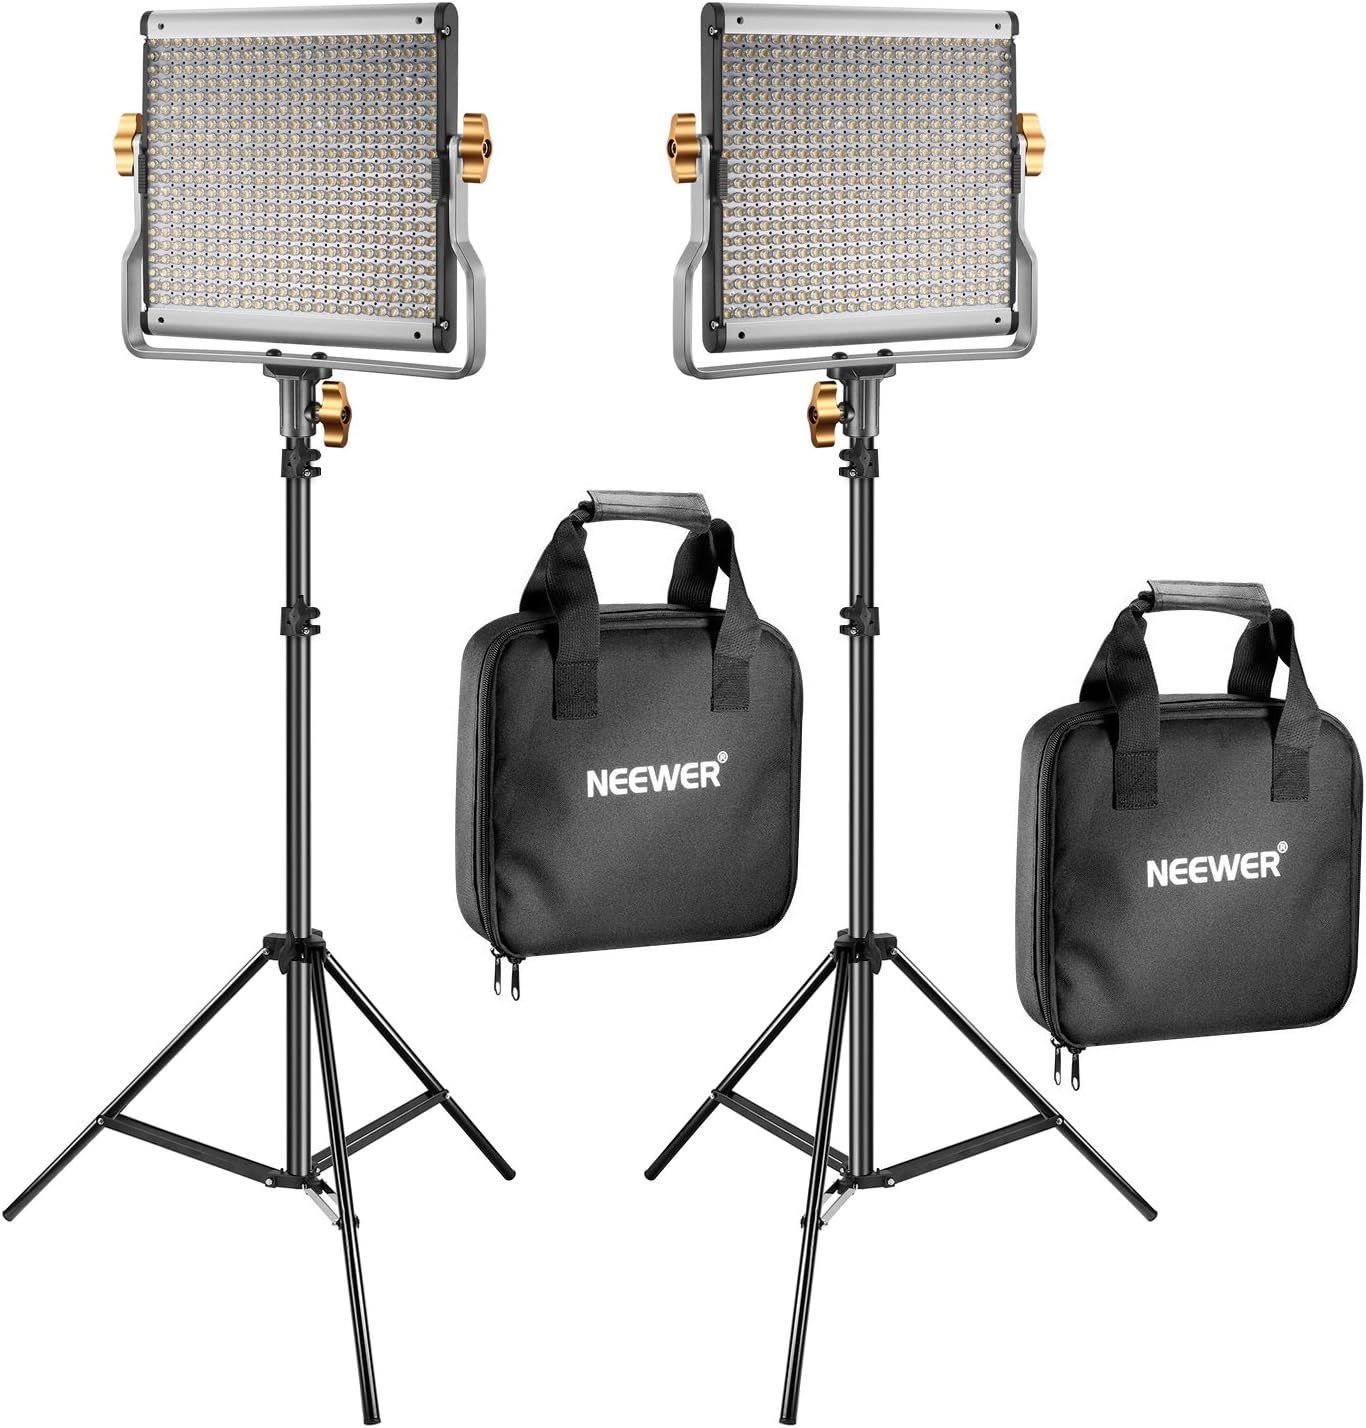 Primary image for Neewer 2 Packs Dimmable Bi-Color 480 Led Video Light And Stand, Video Shooting.